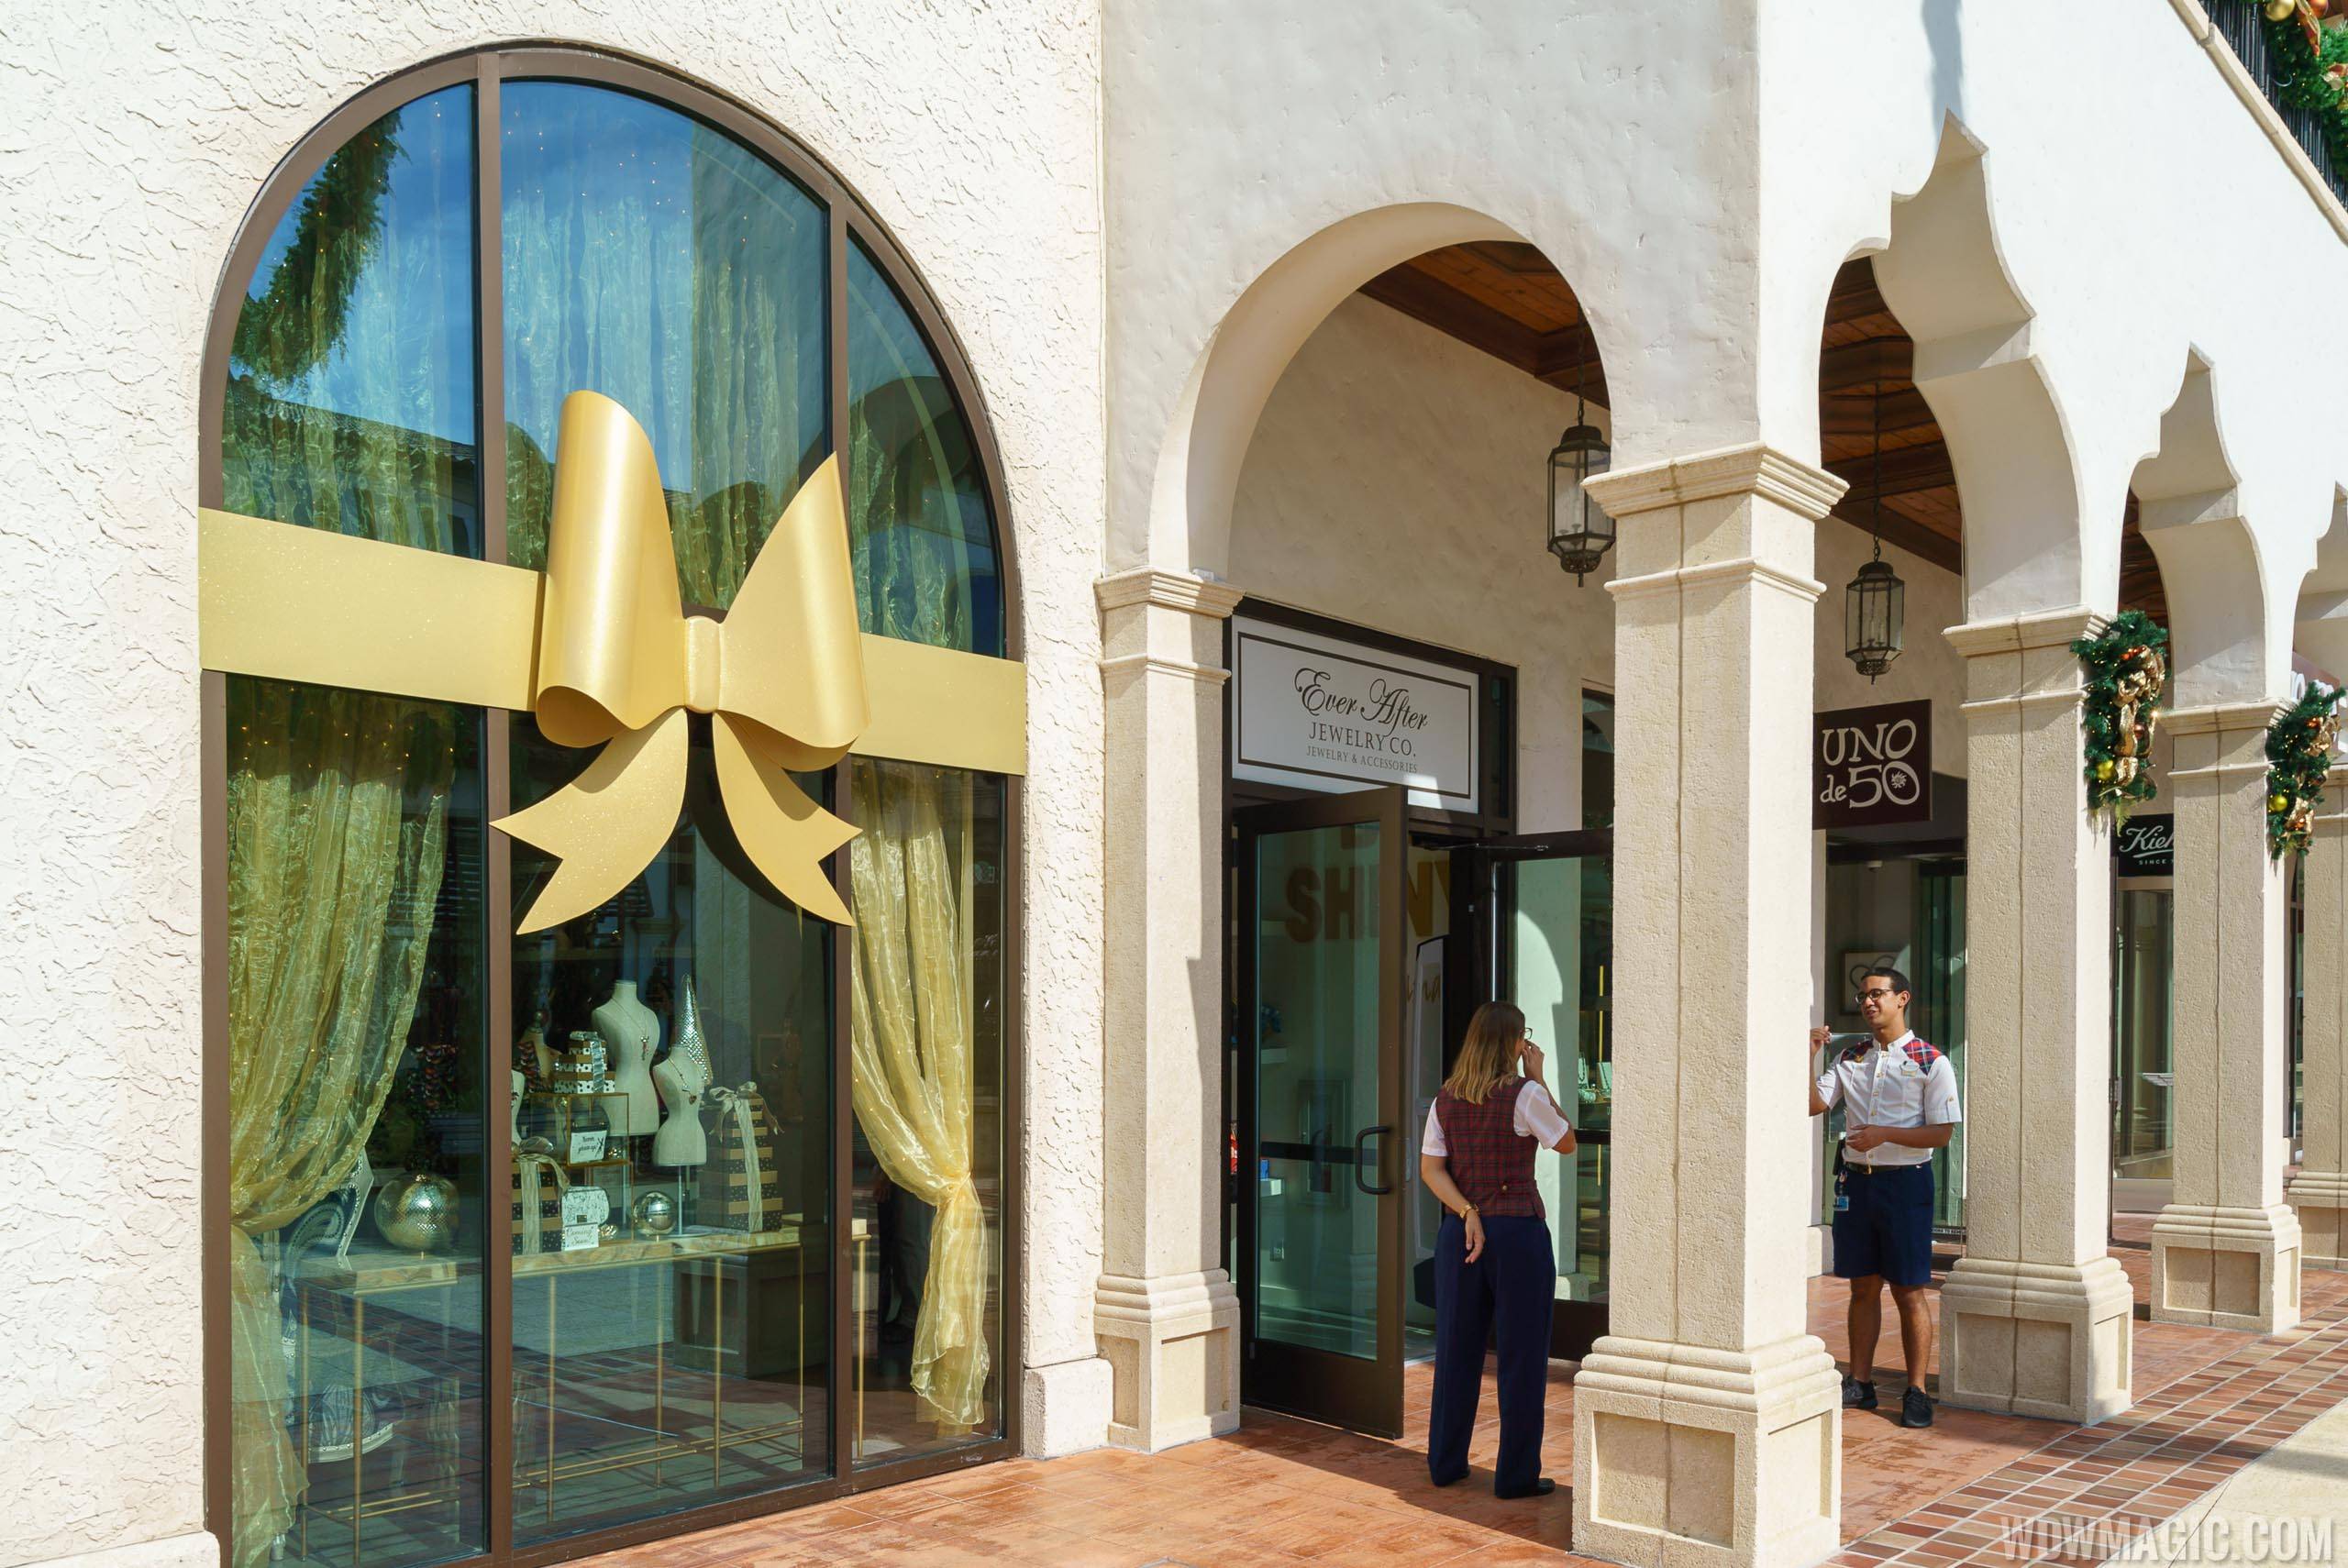 PHOTOS - 'Ever After Jewelry Co.' now open at Disney Springs